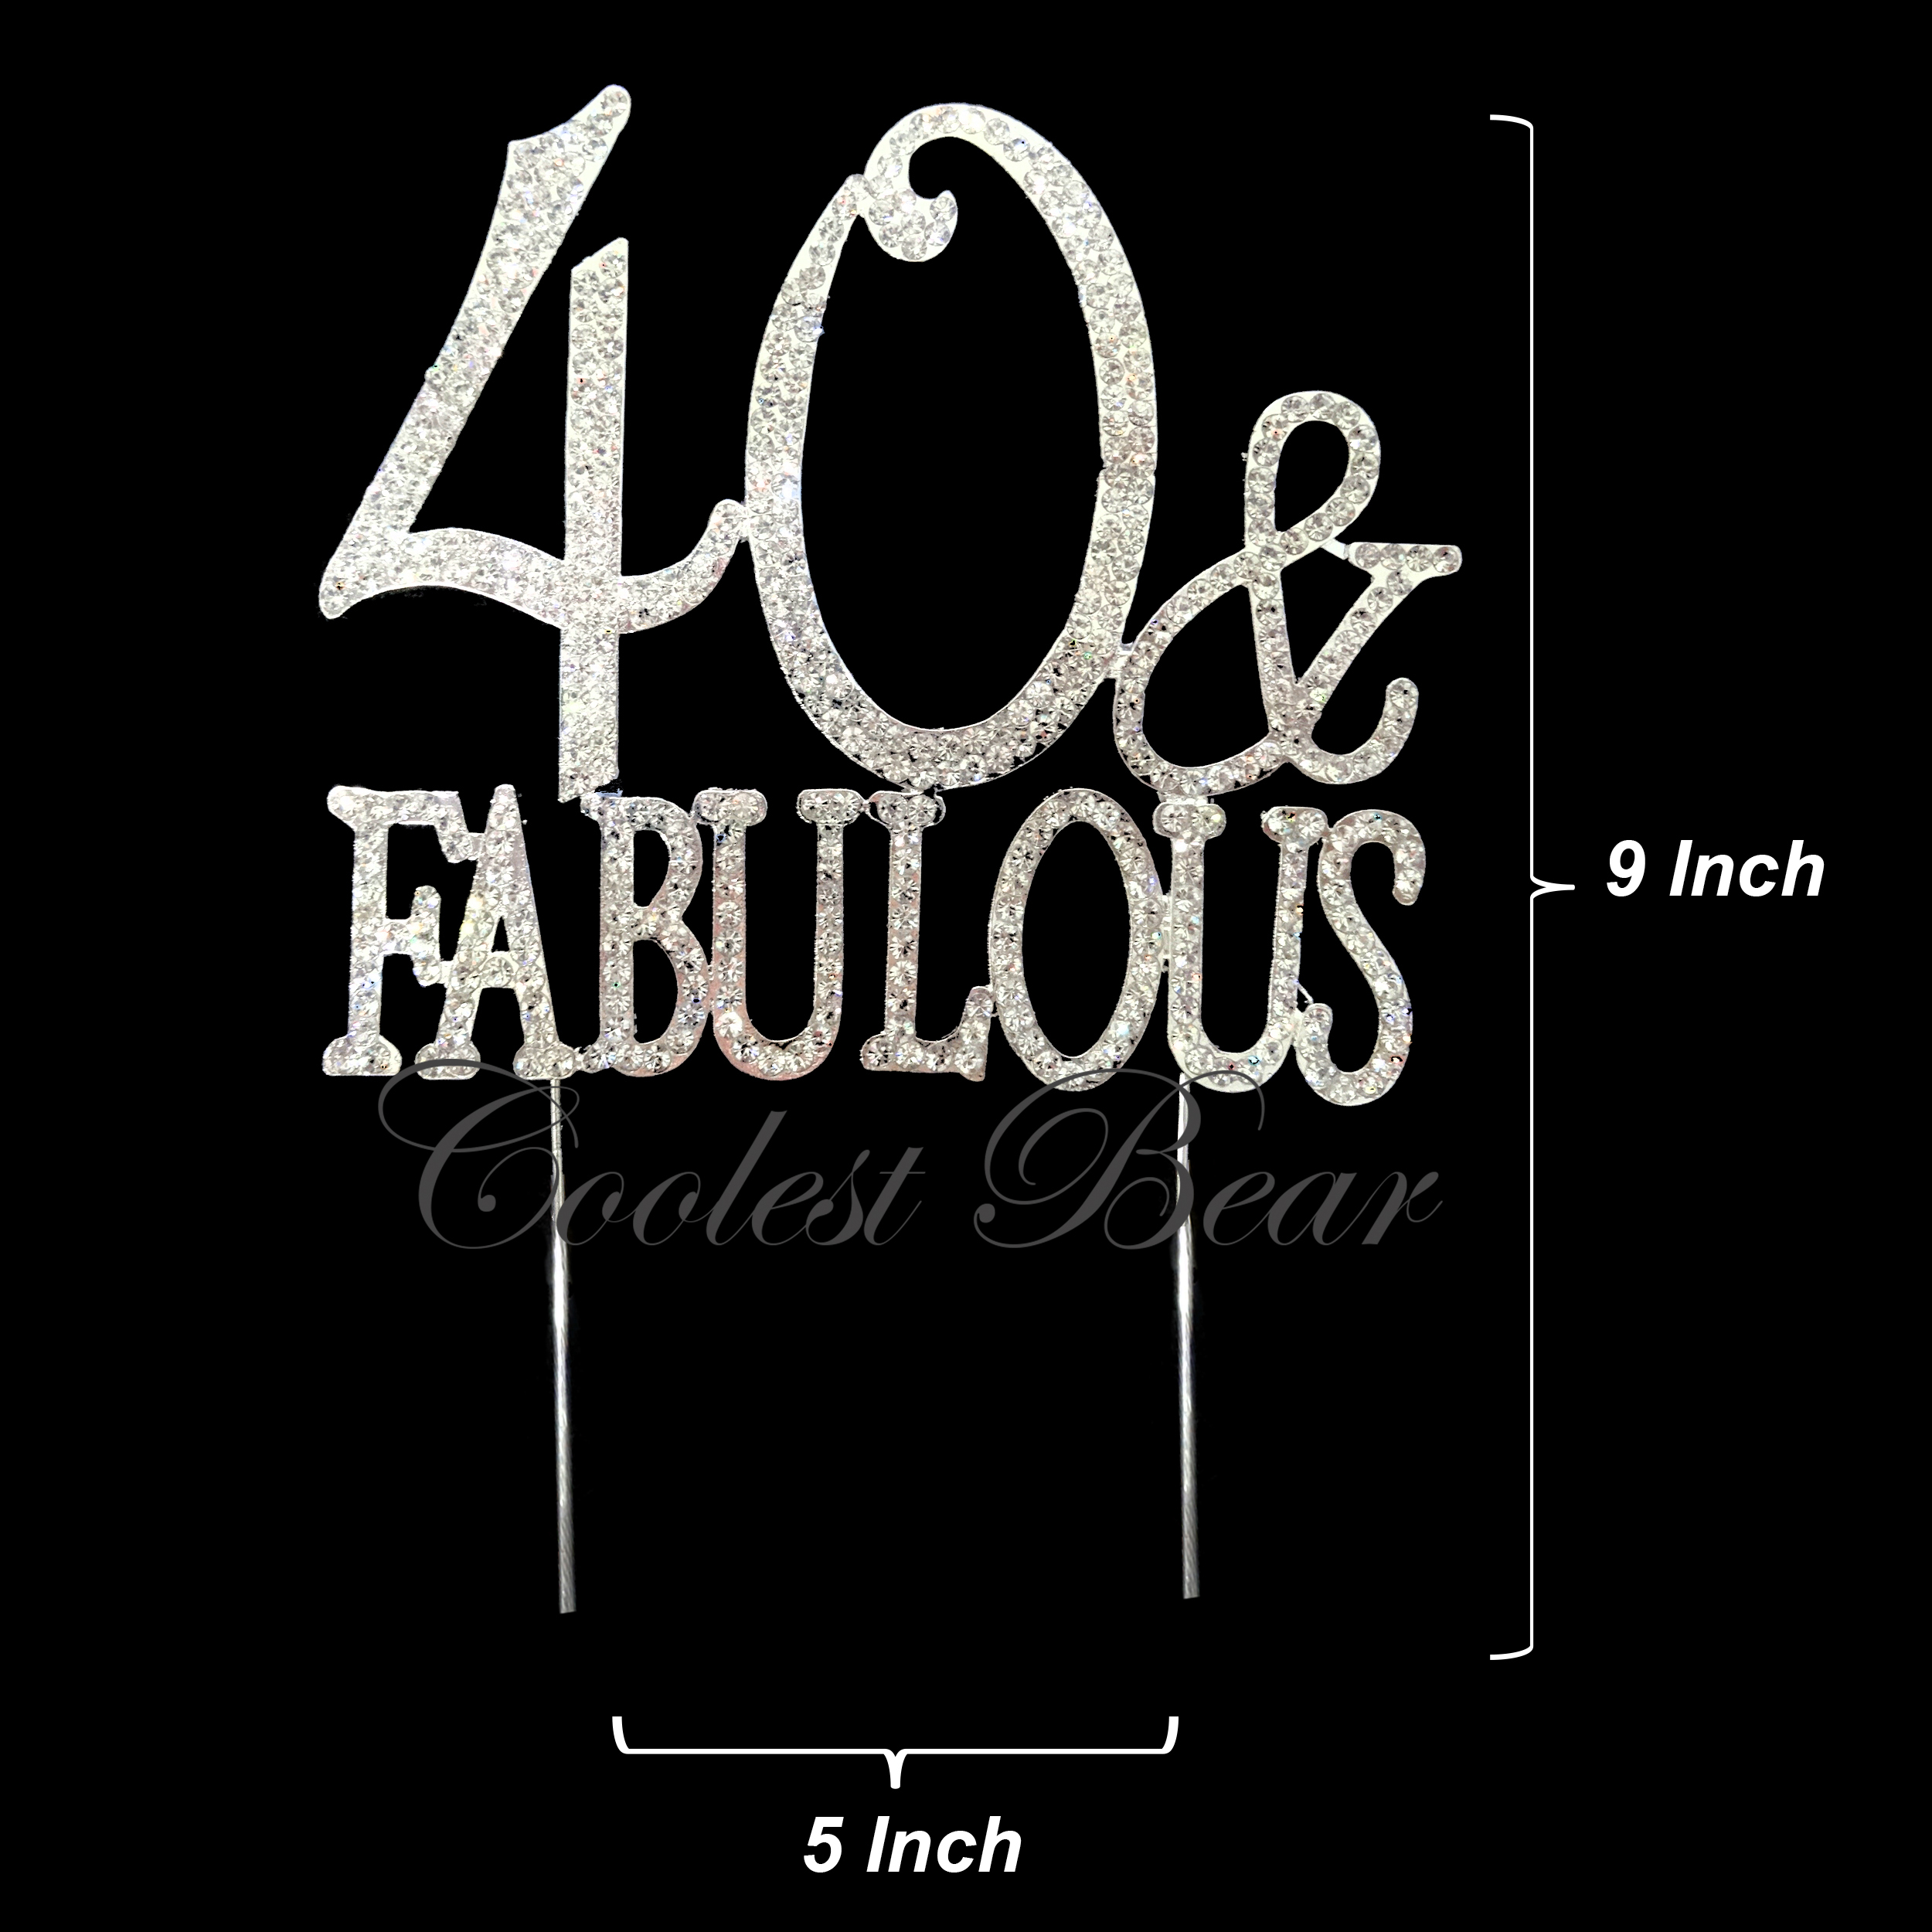 "40 & Fabulous", Silver - Coolest Bear Rhinestone Crystal Cake Topper - image 2 of 3